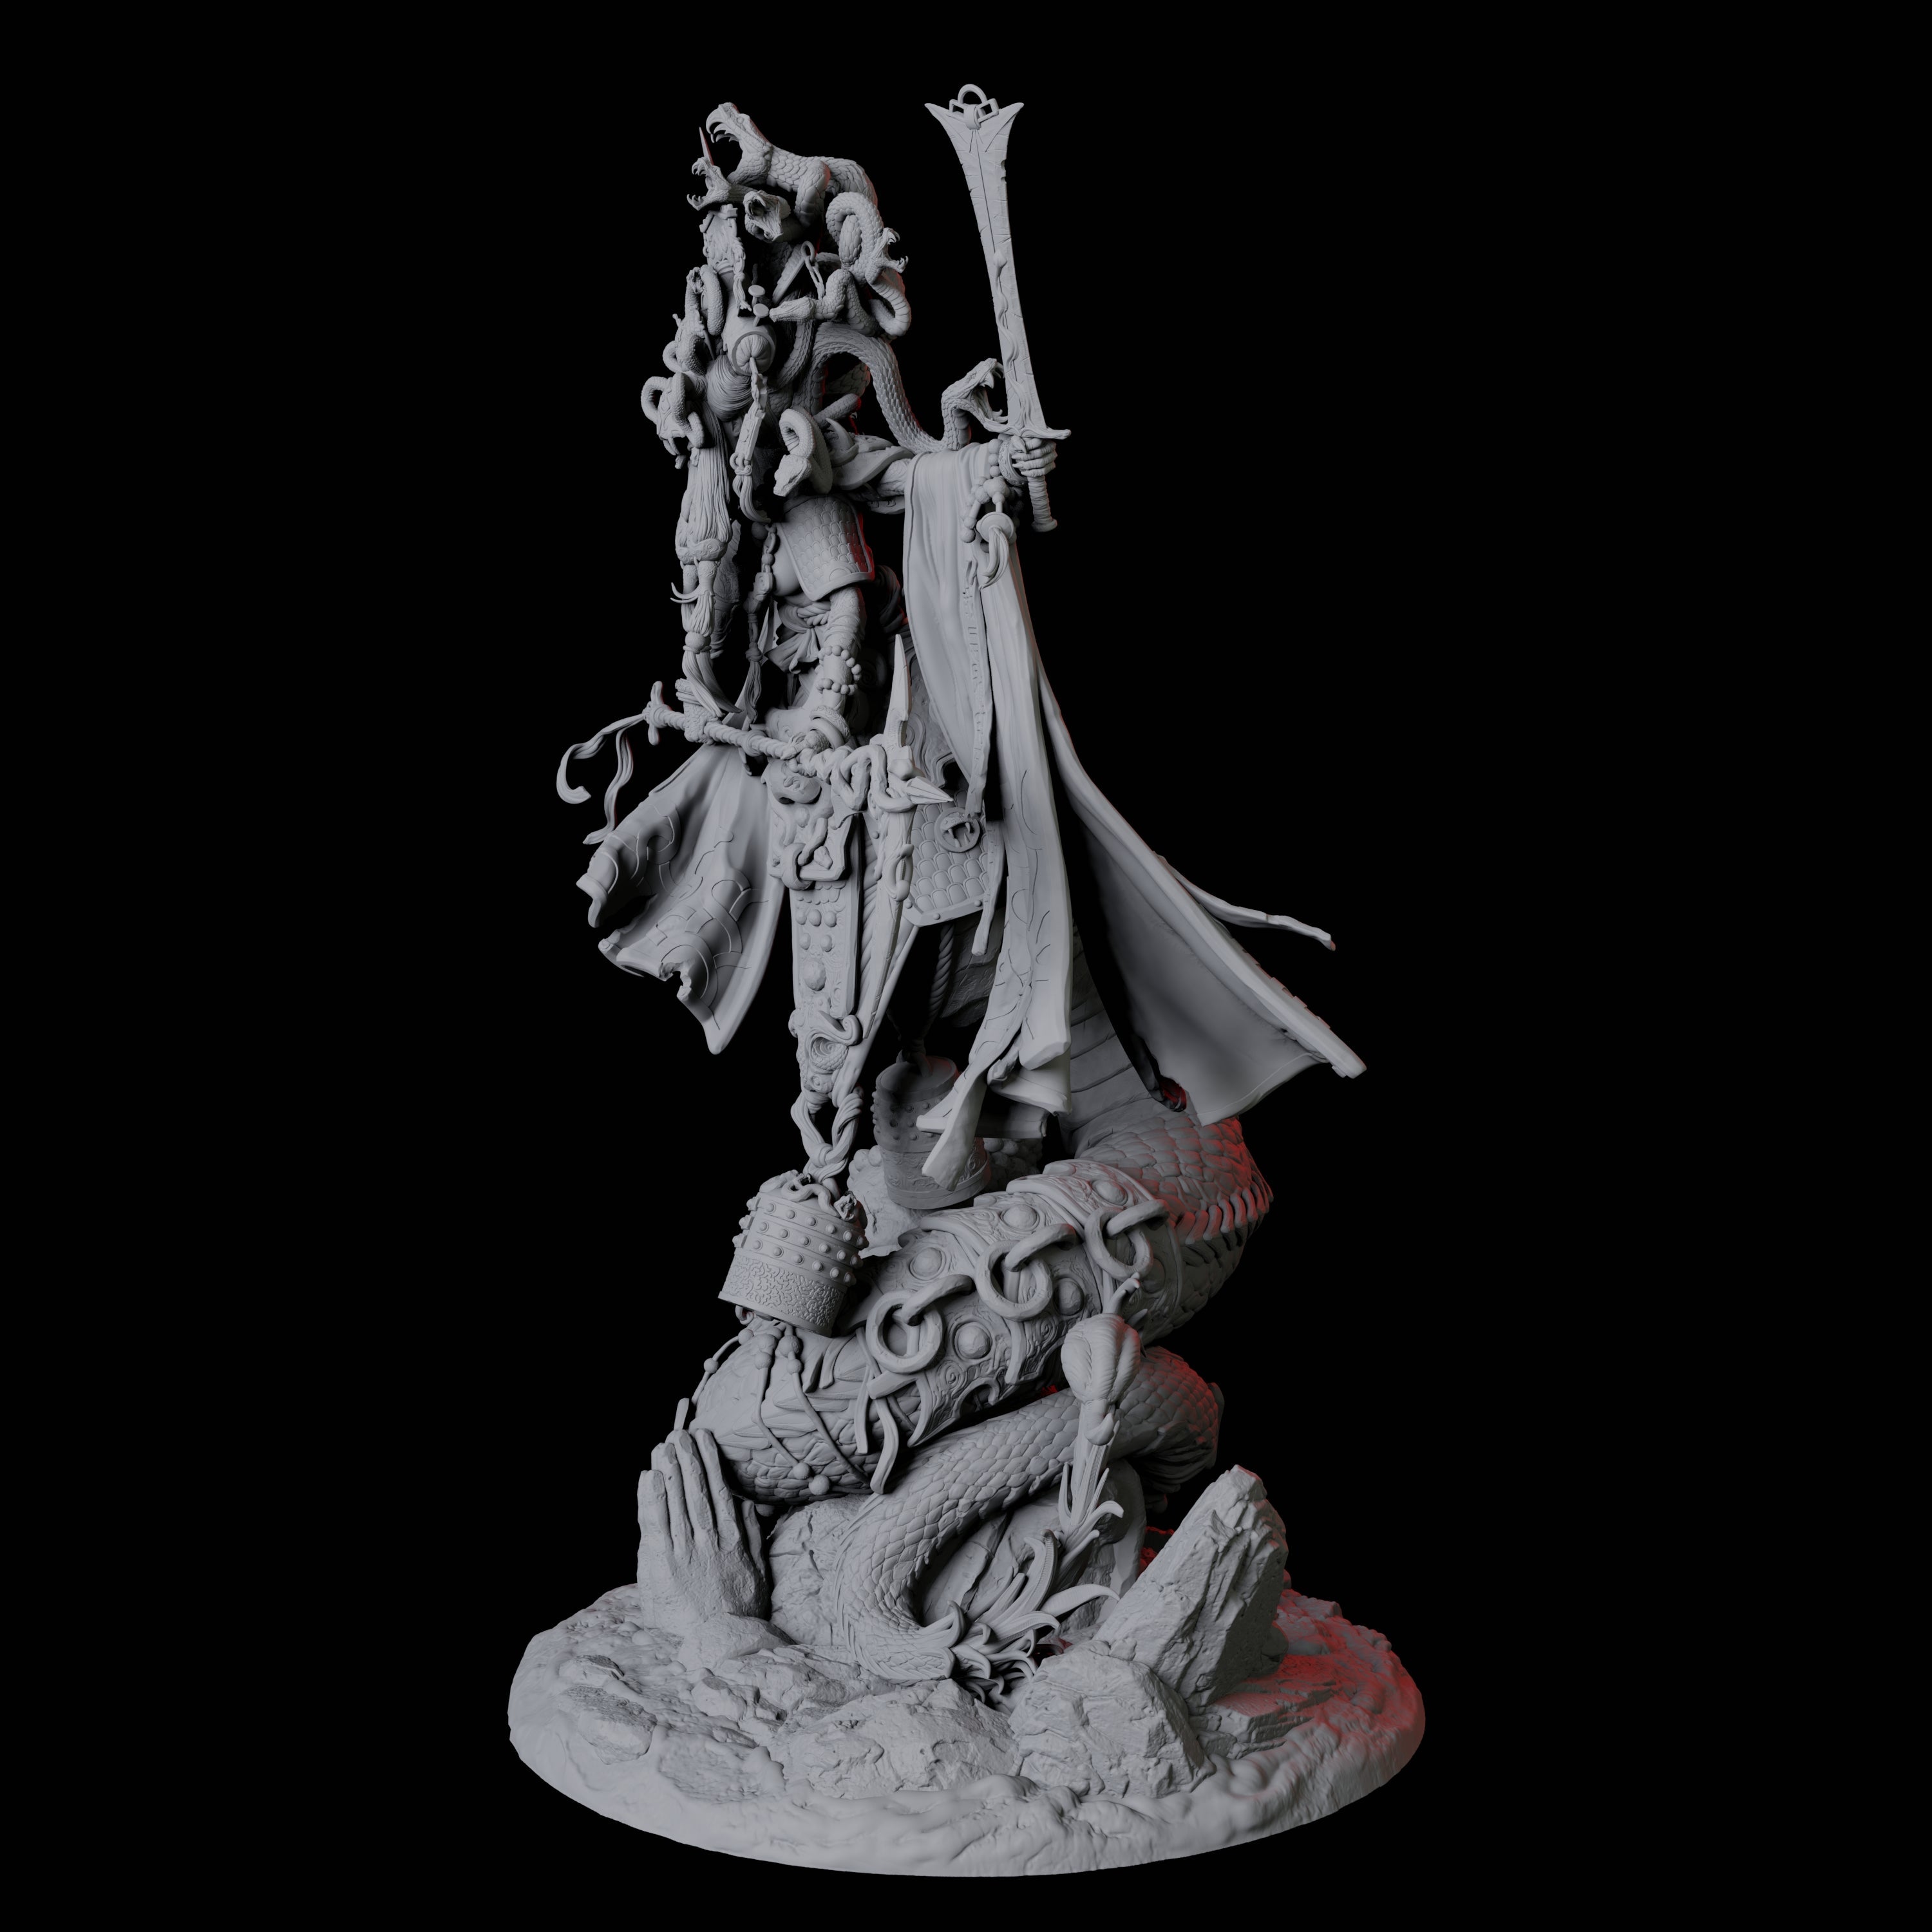 Mega Marilith Matriarch Miniature for Dungeons and Dragons, Pathfinder or other TTRPGs